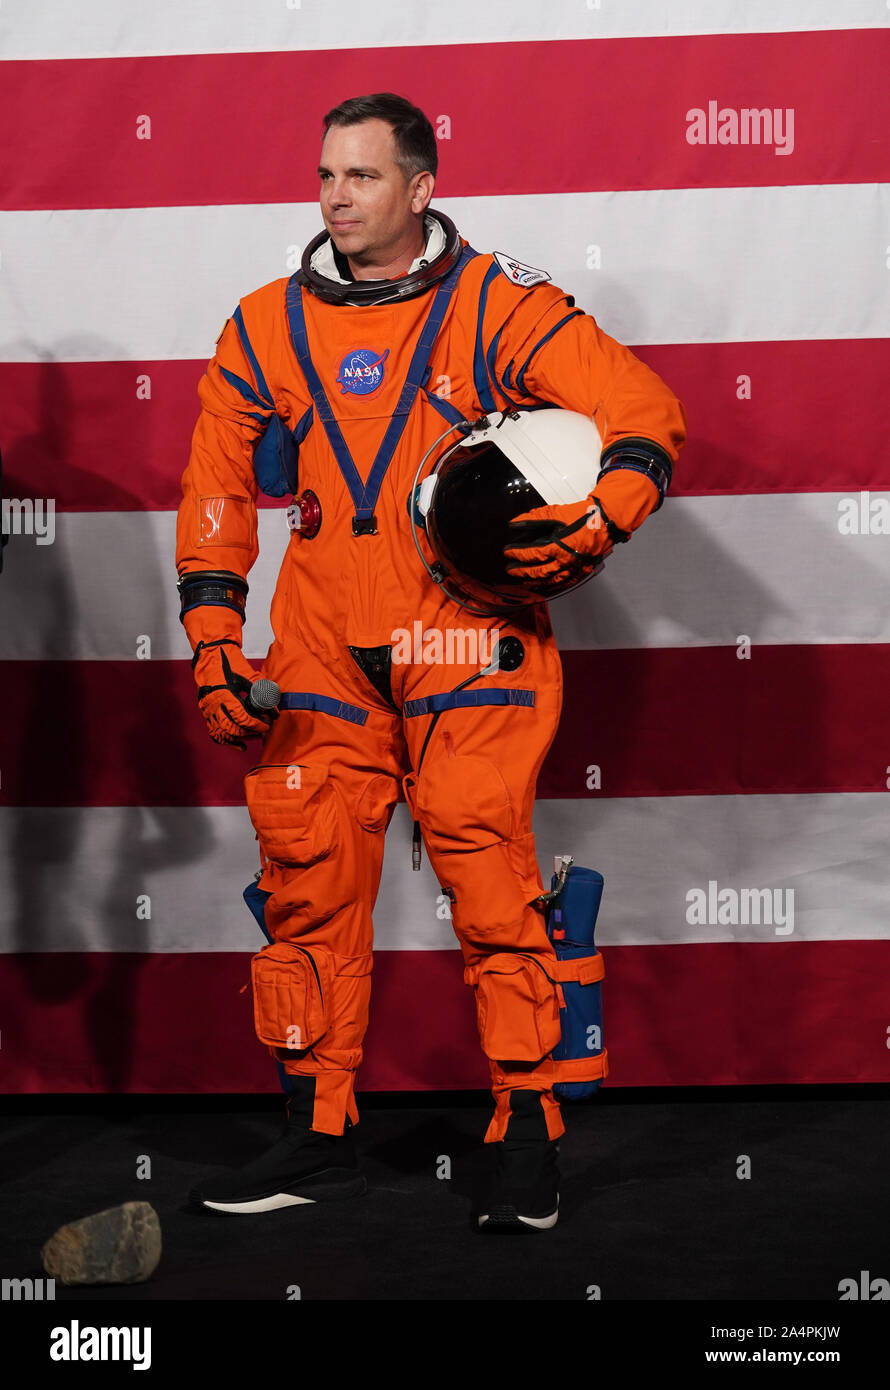 Washington, USA. 15th Oct, 2019. Lead engineer Dustin Gohmert dispays the Orion Crew Survival System spacesuit at NASA headquarters in Washington, DC, the United States, on Oct. 15, 2019. The U.S. space agency NASA unveiled on Tuesday the next-generation spacesuits to be used in its Artemis program that will send the first woman and next man to the Lunar South Pole by 2024. Credit: Liu Jie/Xinhua/Alamy Live News Stock Photo